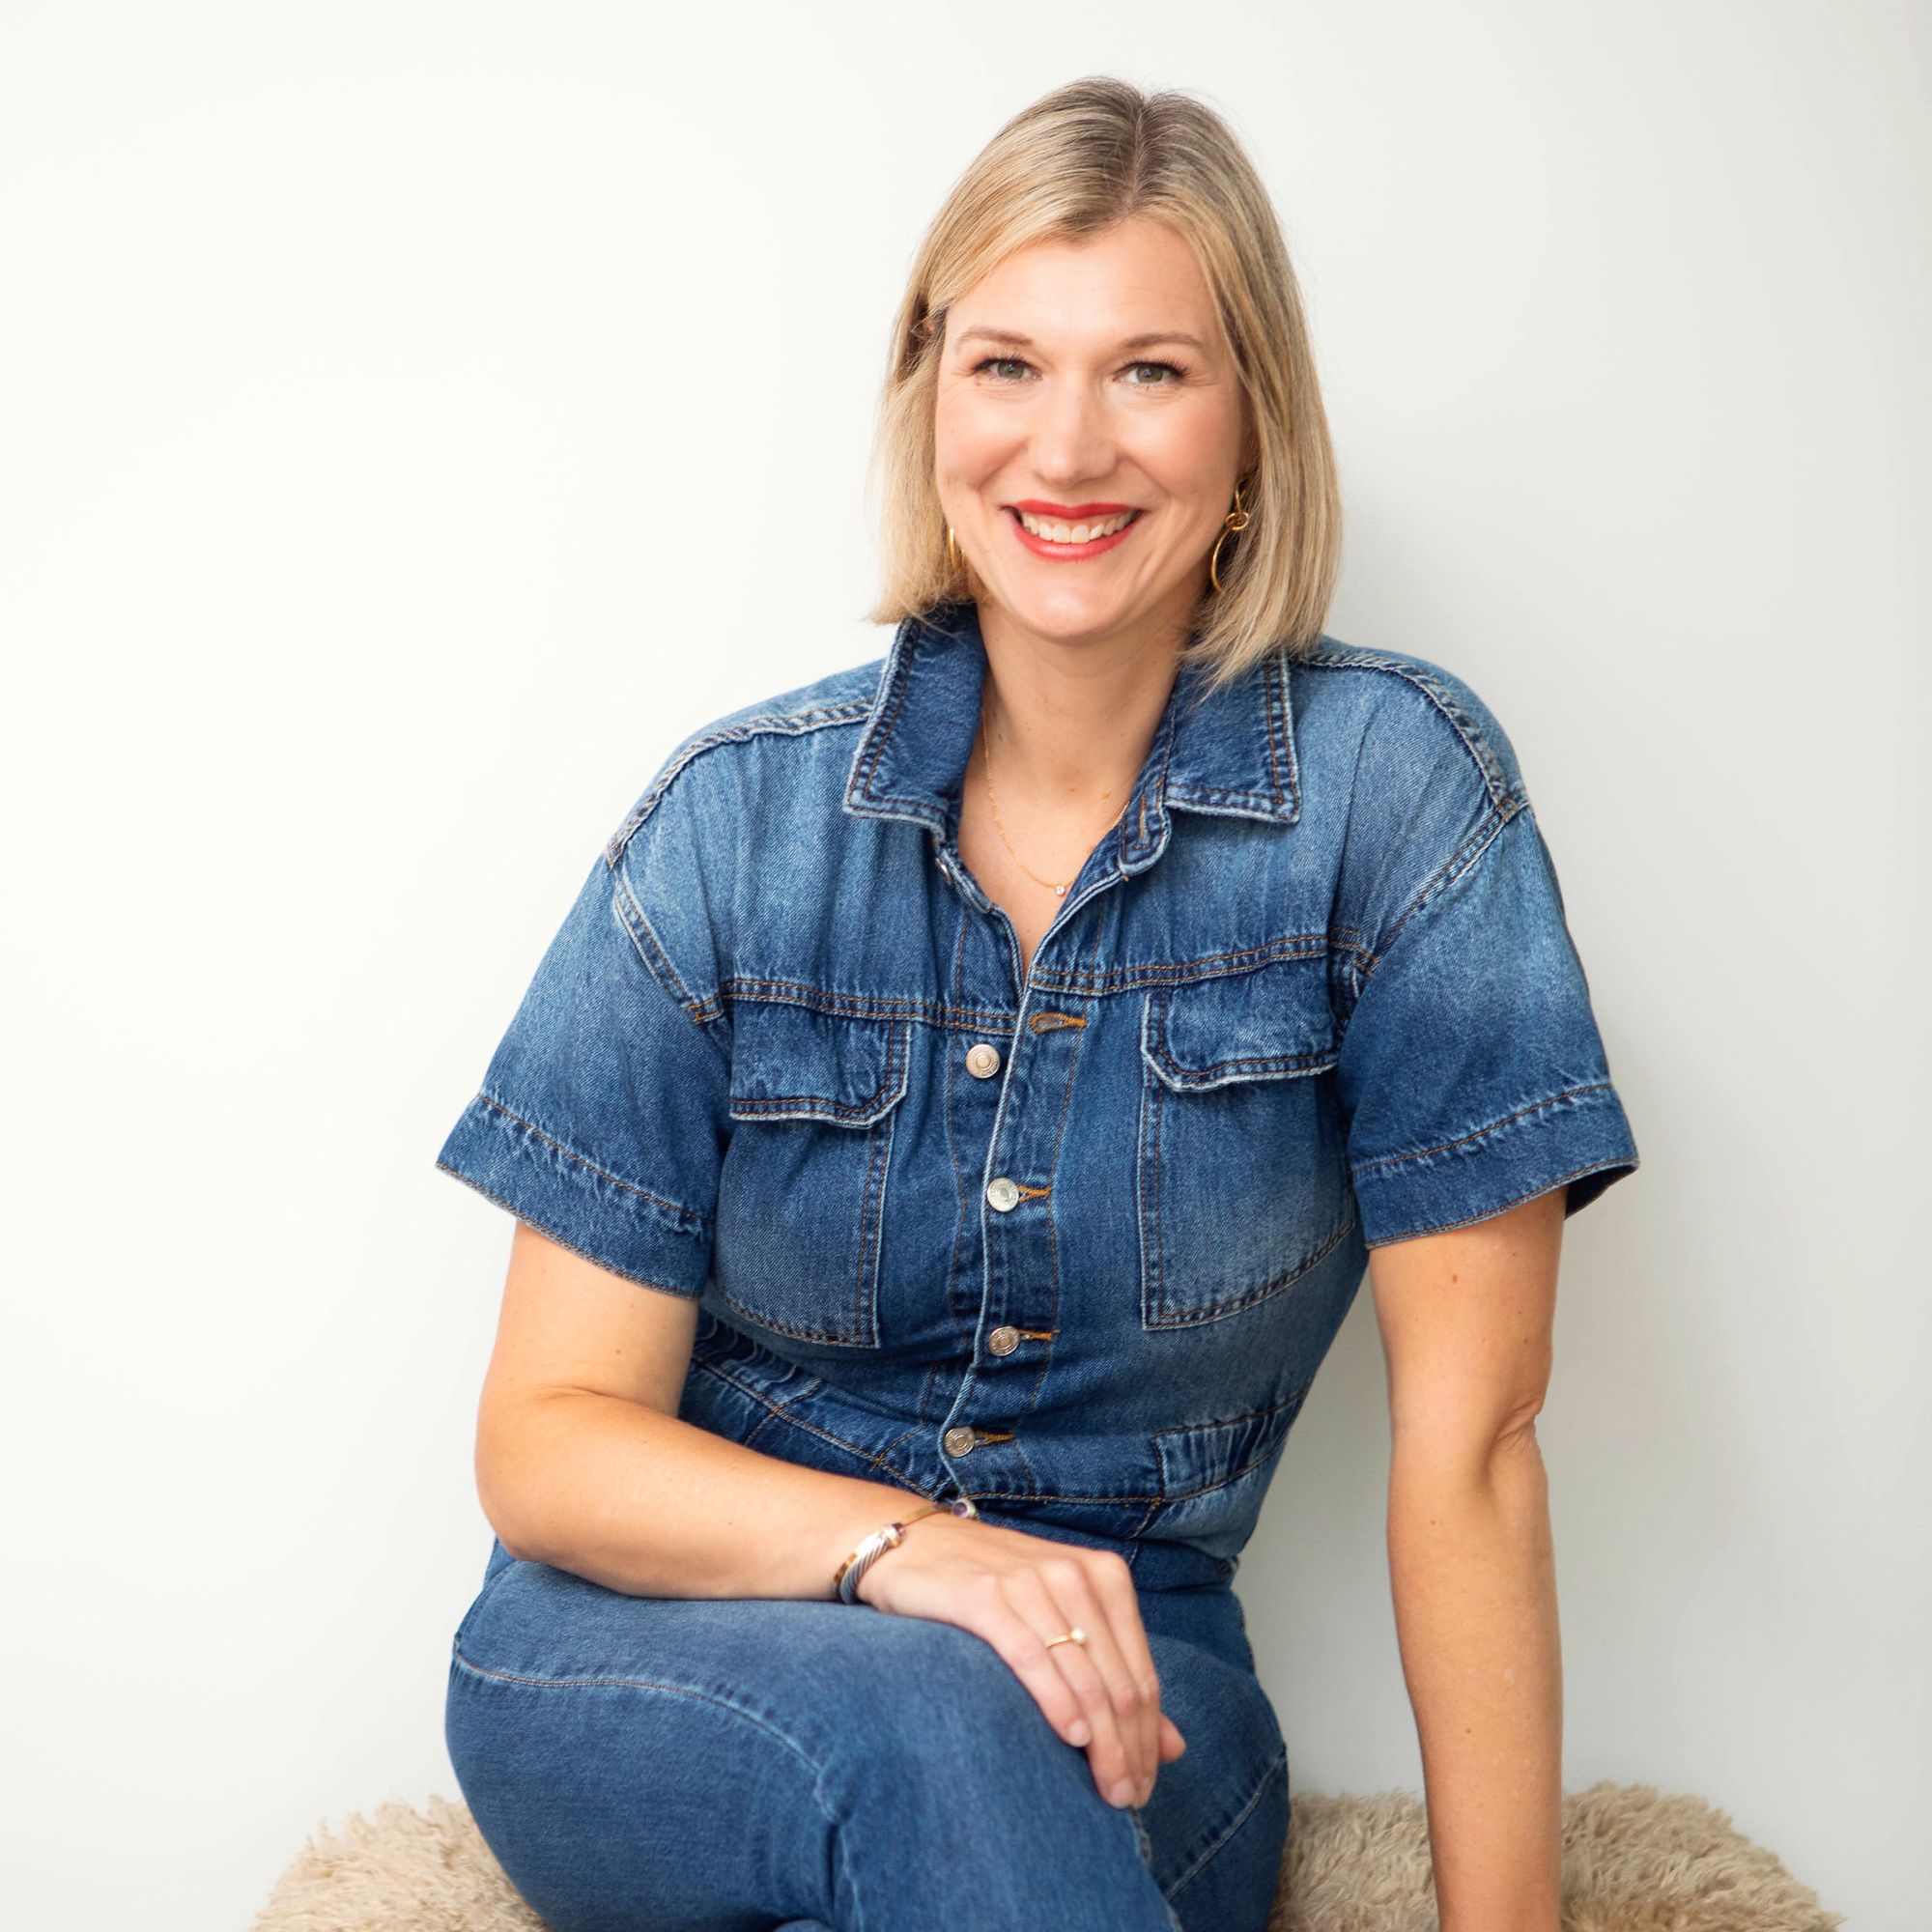 A picture of Sarah Storms, a blonde woman wearing a denim jumpsuit